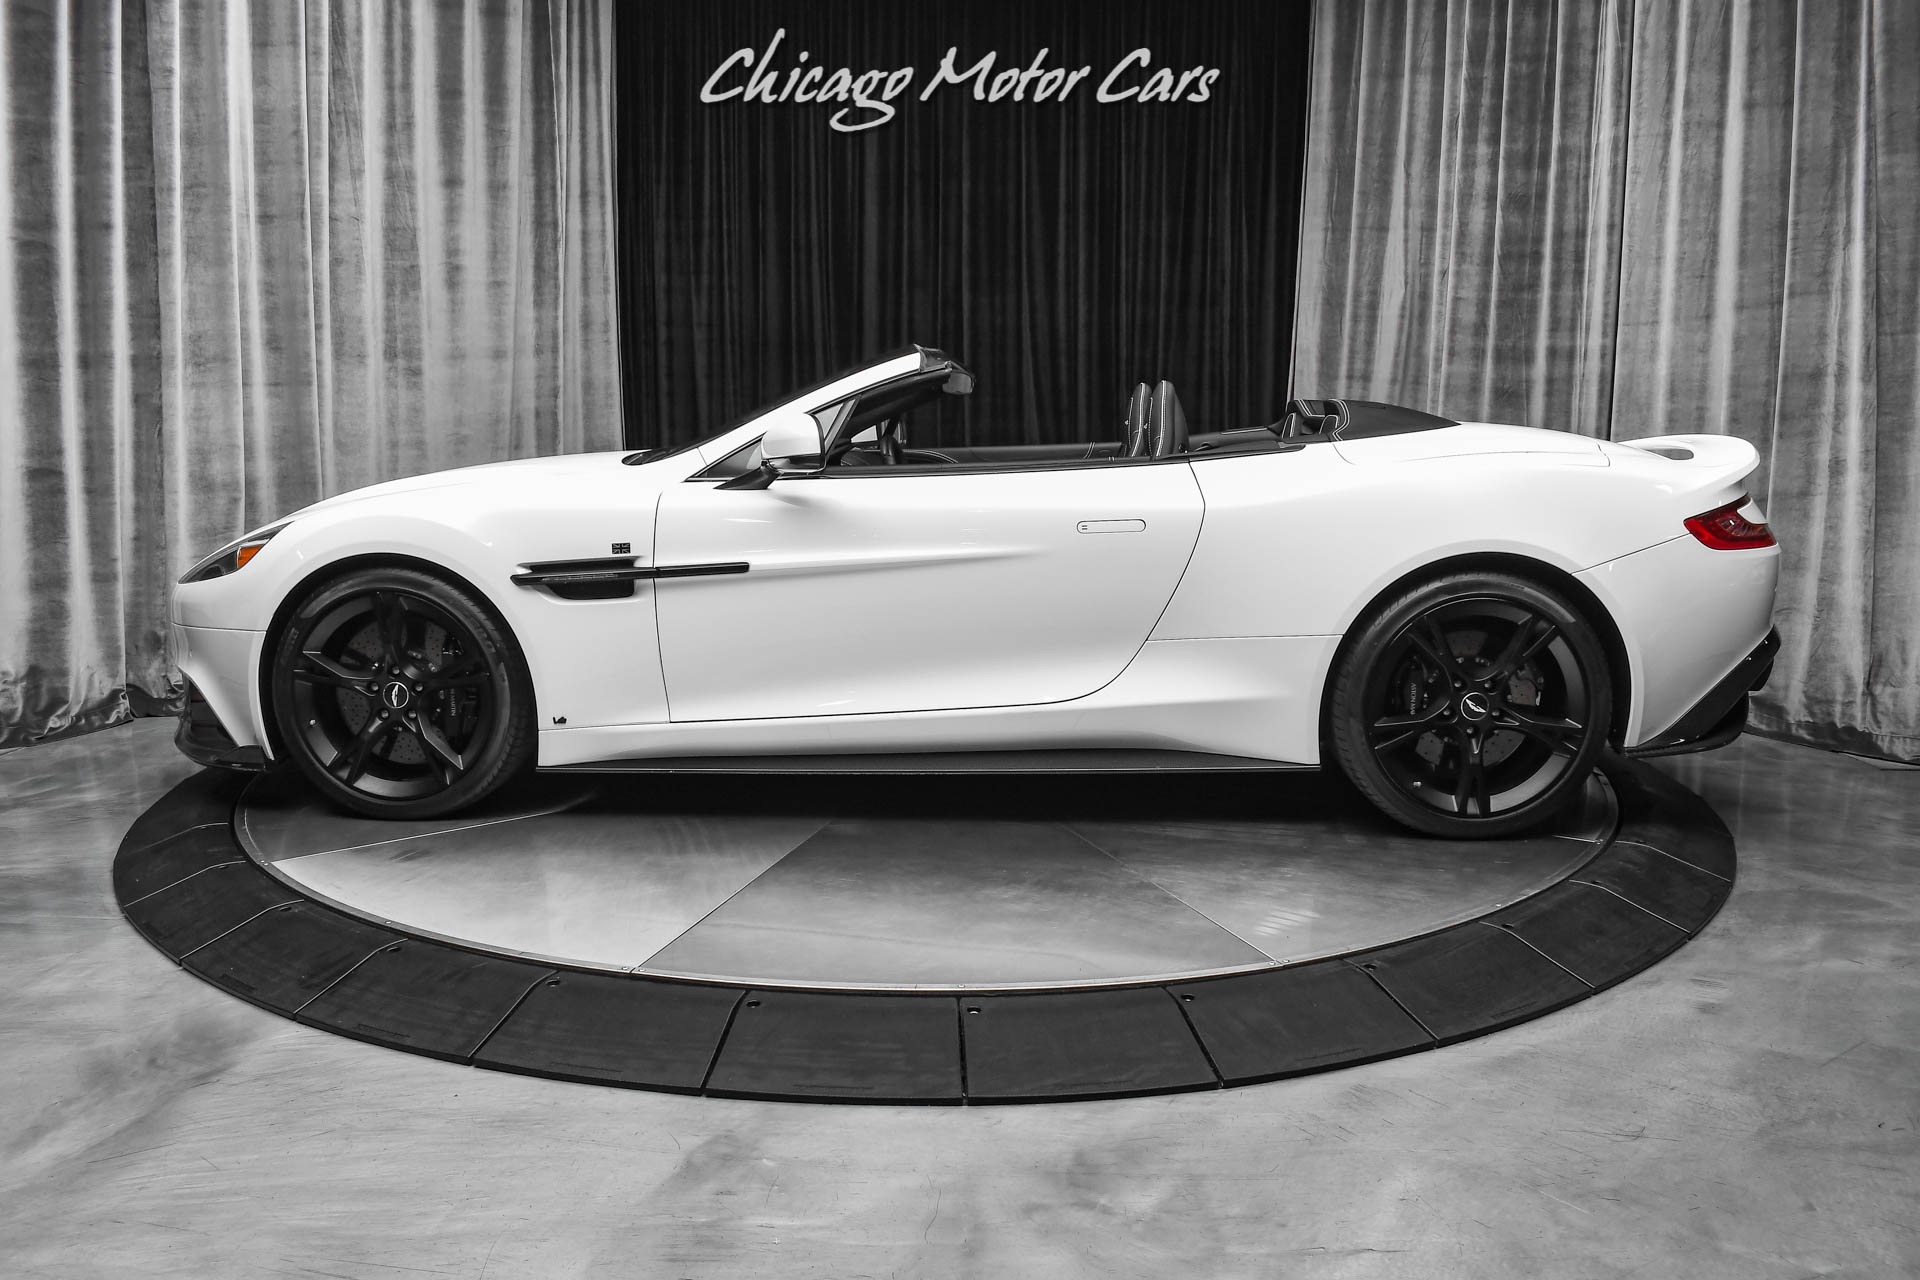 Used-2018-Aston-Martin-Vanquish-S-Volante-349k-MSRP-Loaded-with-Carbon-Fiber-Only-6400-Miles